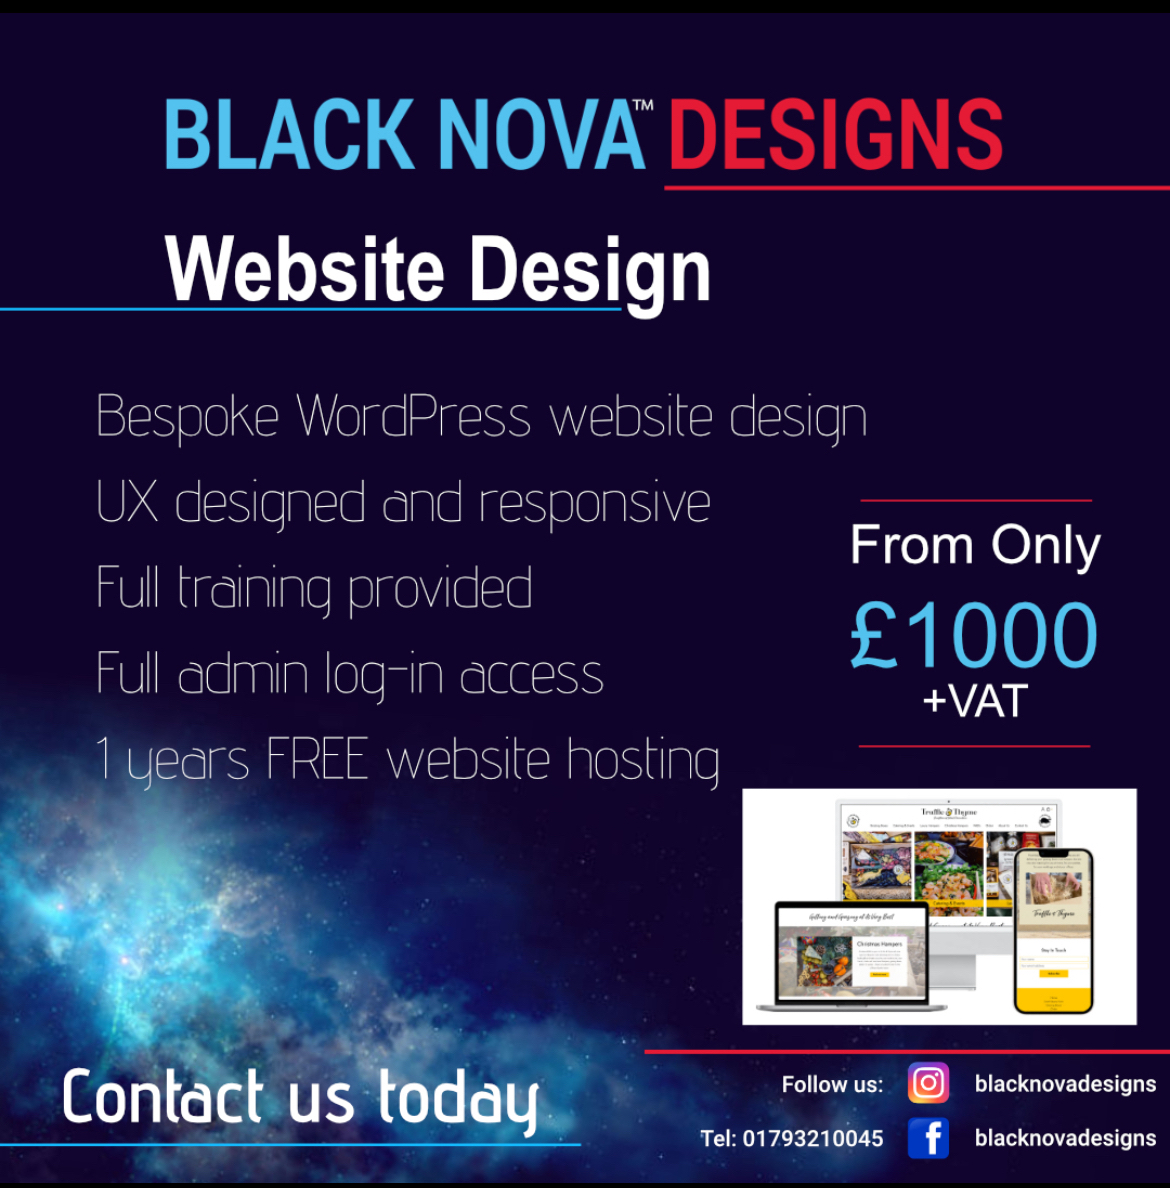 Our IT solutions make things simple for YOU and your business!
Find out how we can help via the link below 👇️

blacknovadesigns.co.uk/it-services/

#itservices #itsolutiosn #wifi #pc #laptop #hardware #softwareupgrade #voipphones #businesssolutions